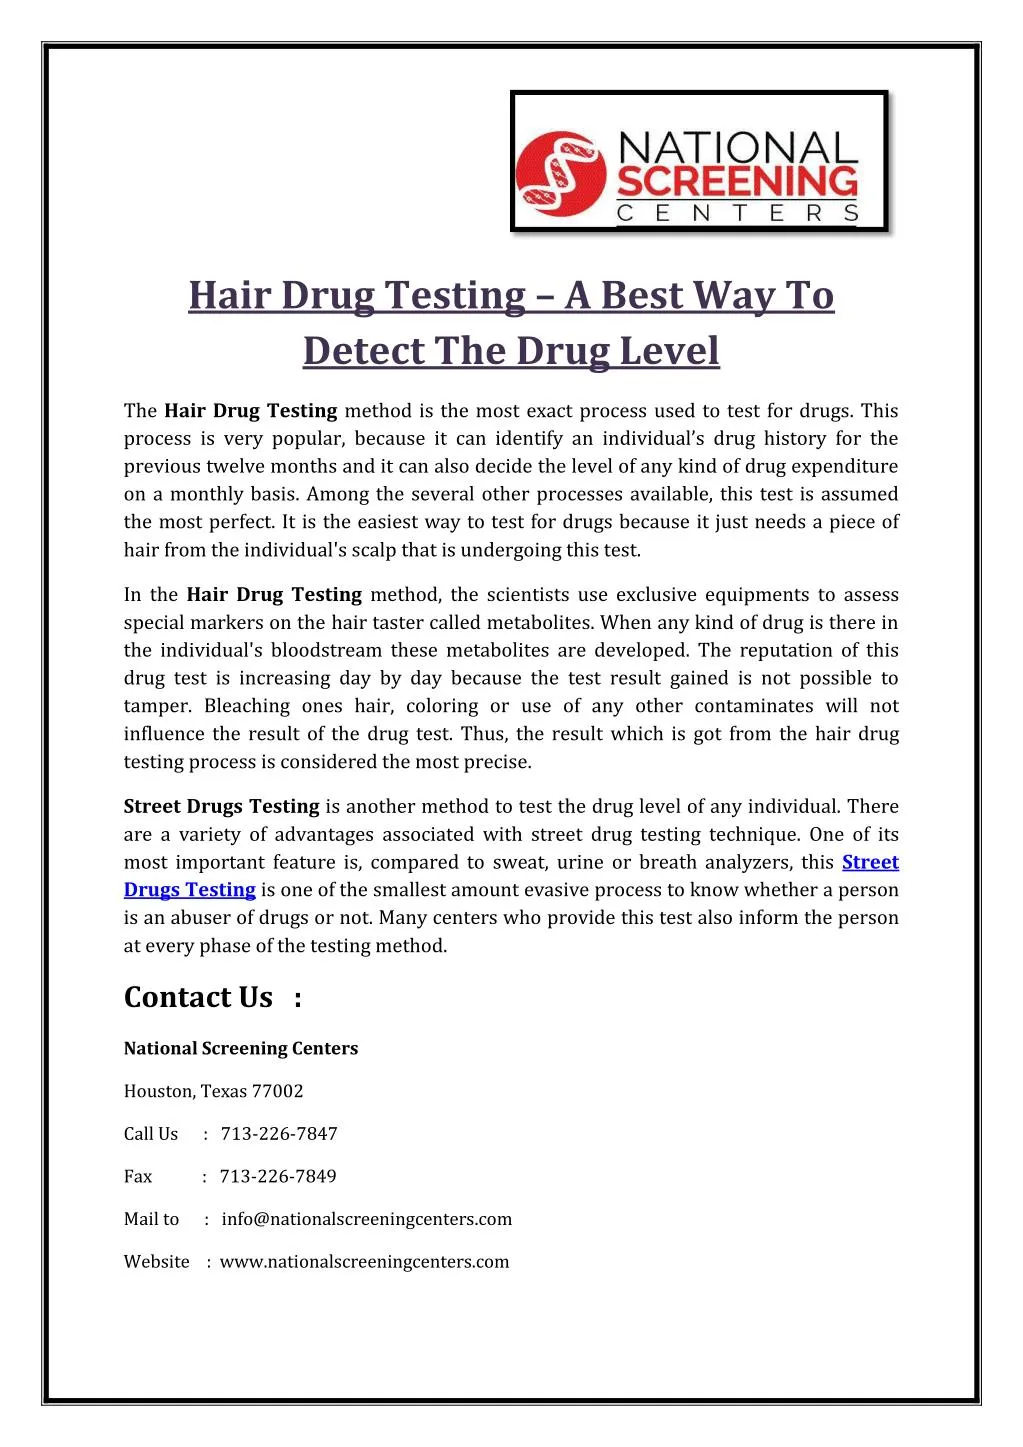 hair drug testing a best way to detect the drug